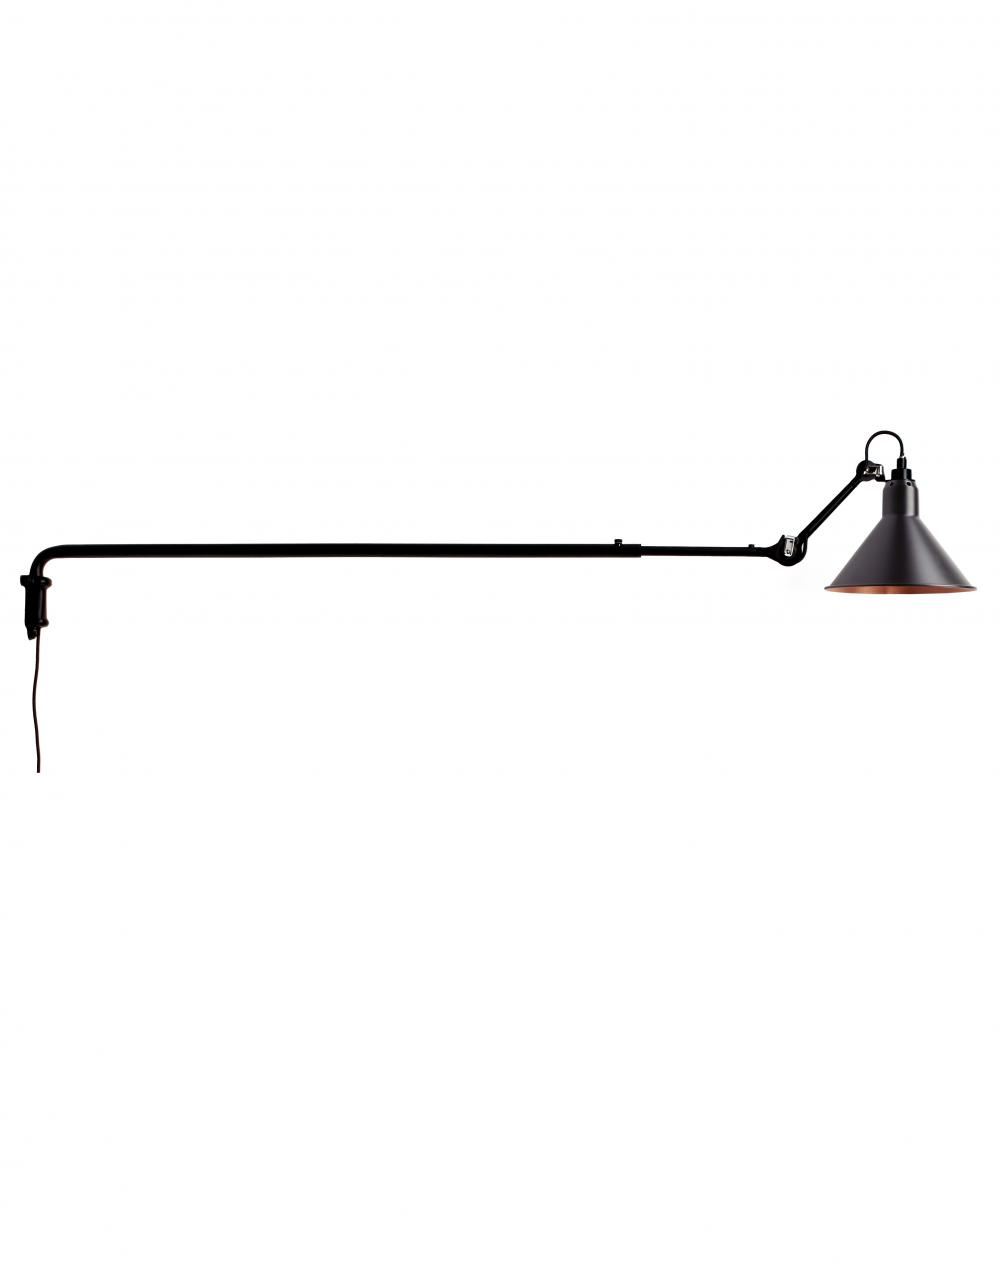 Lampe Gras 213 Wall Light Black Shade With Copper Interior Conic